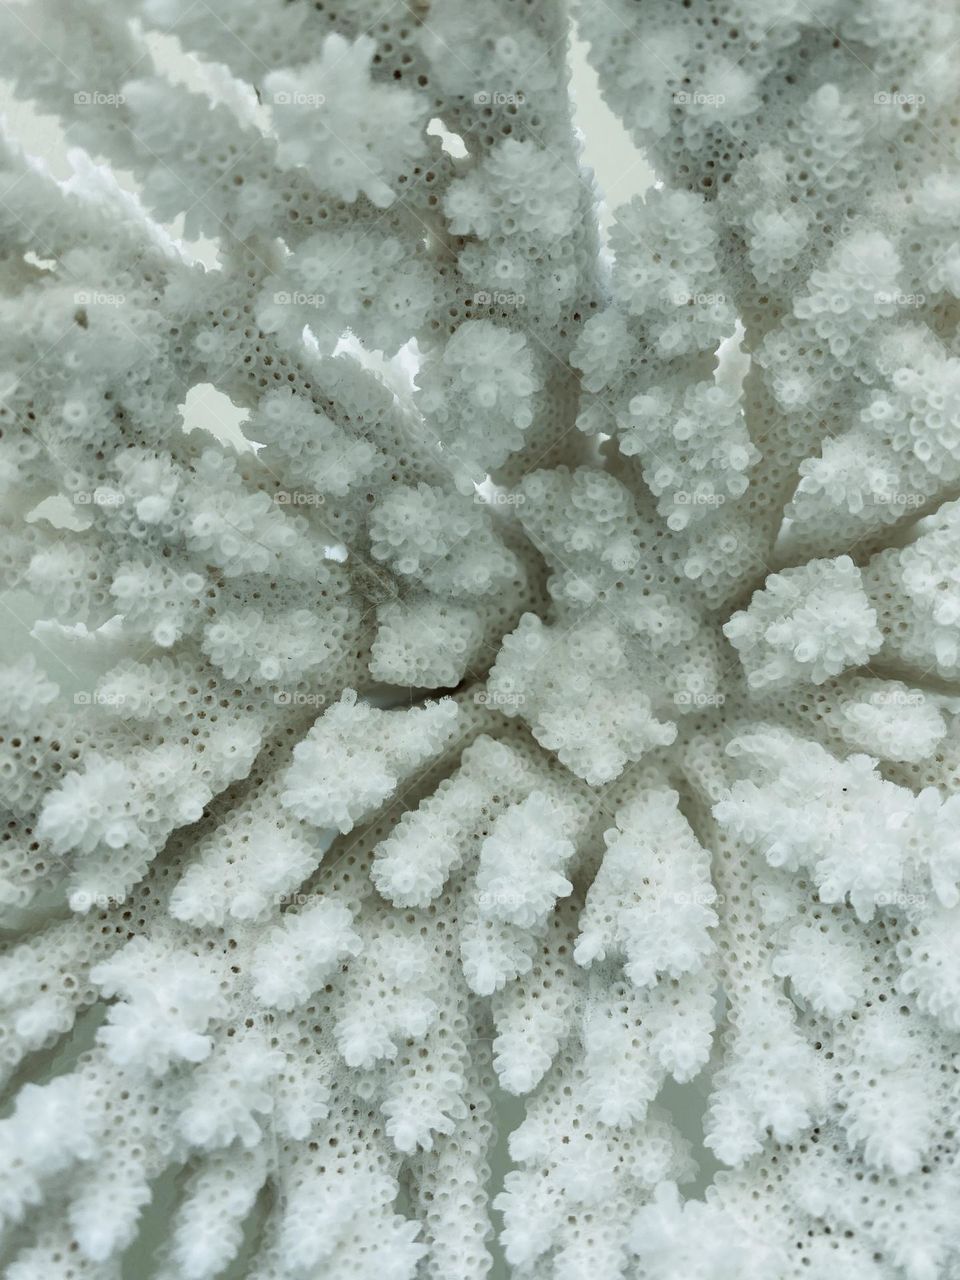 Close up photo of white corals in full framed.